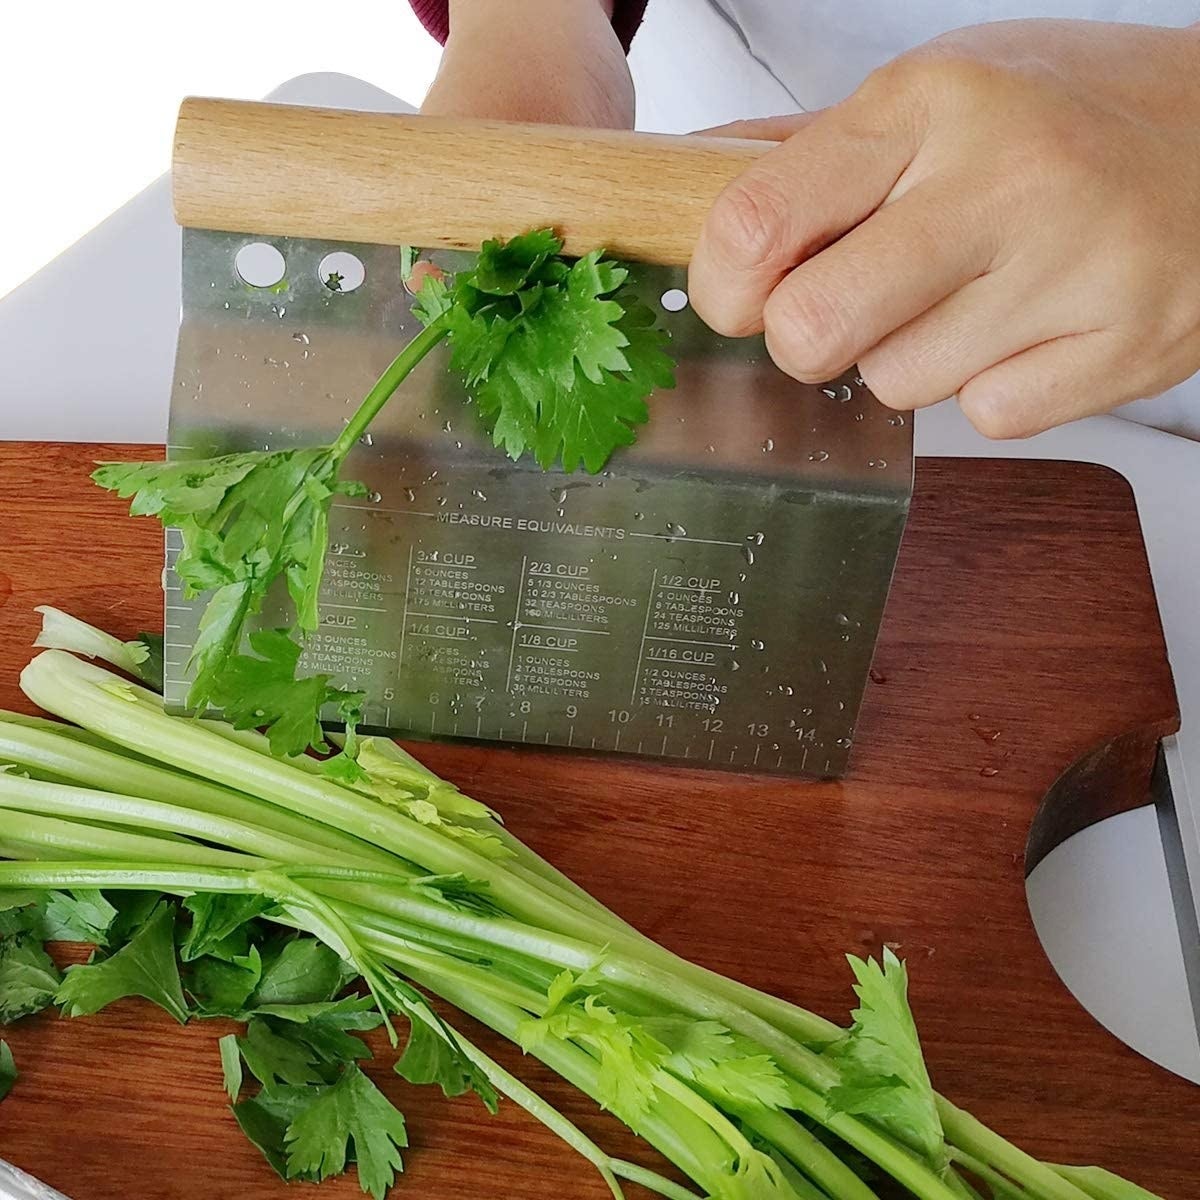 13 Cool Kitchen Gadgets to Change Up Your Cooking Game